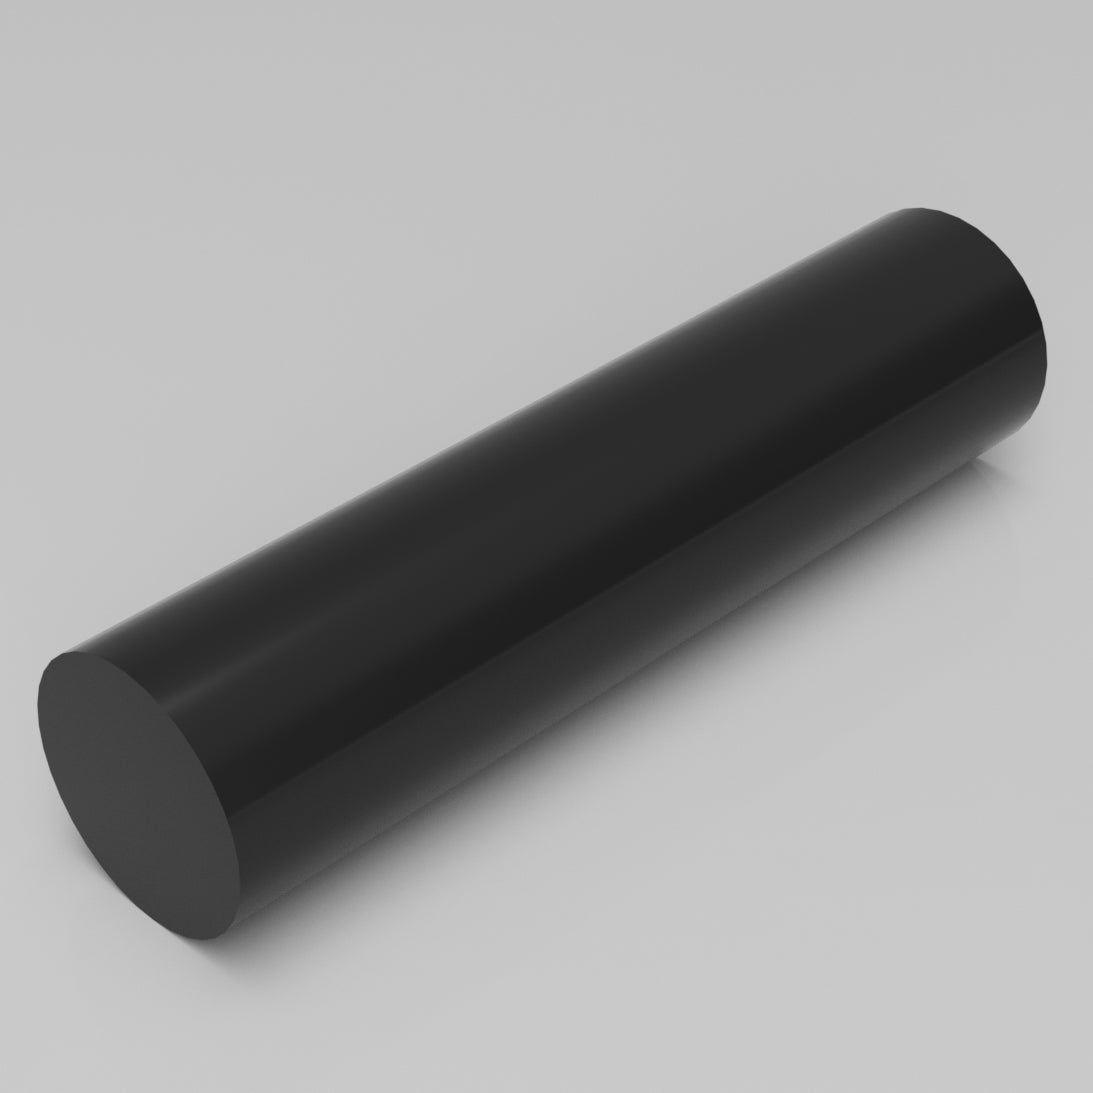 Machinable Wax Cylinder Bar Front View 3 Inch by 12 Inch